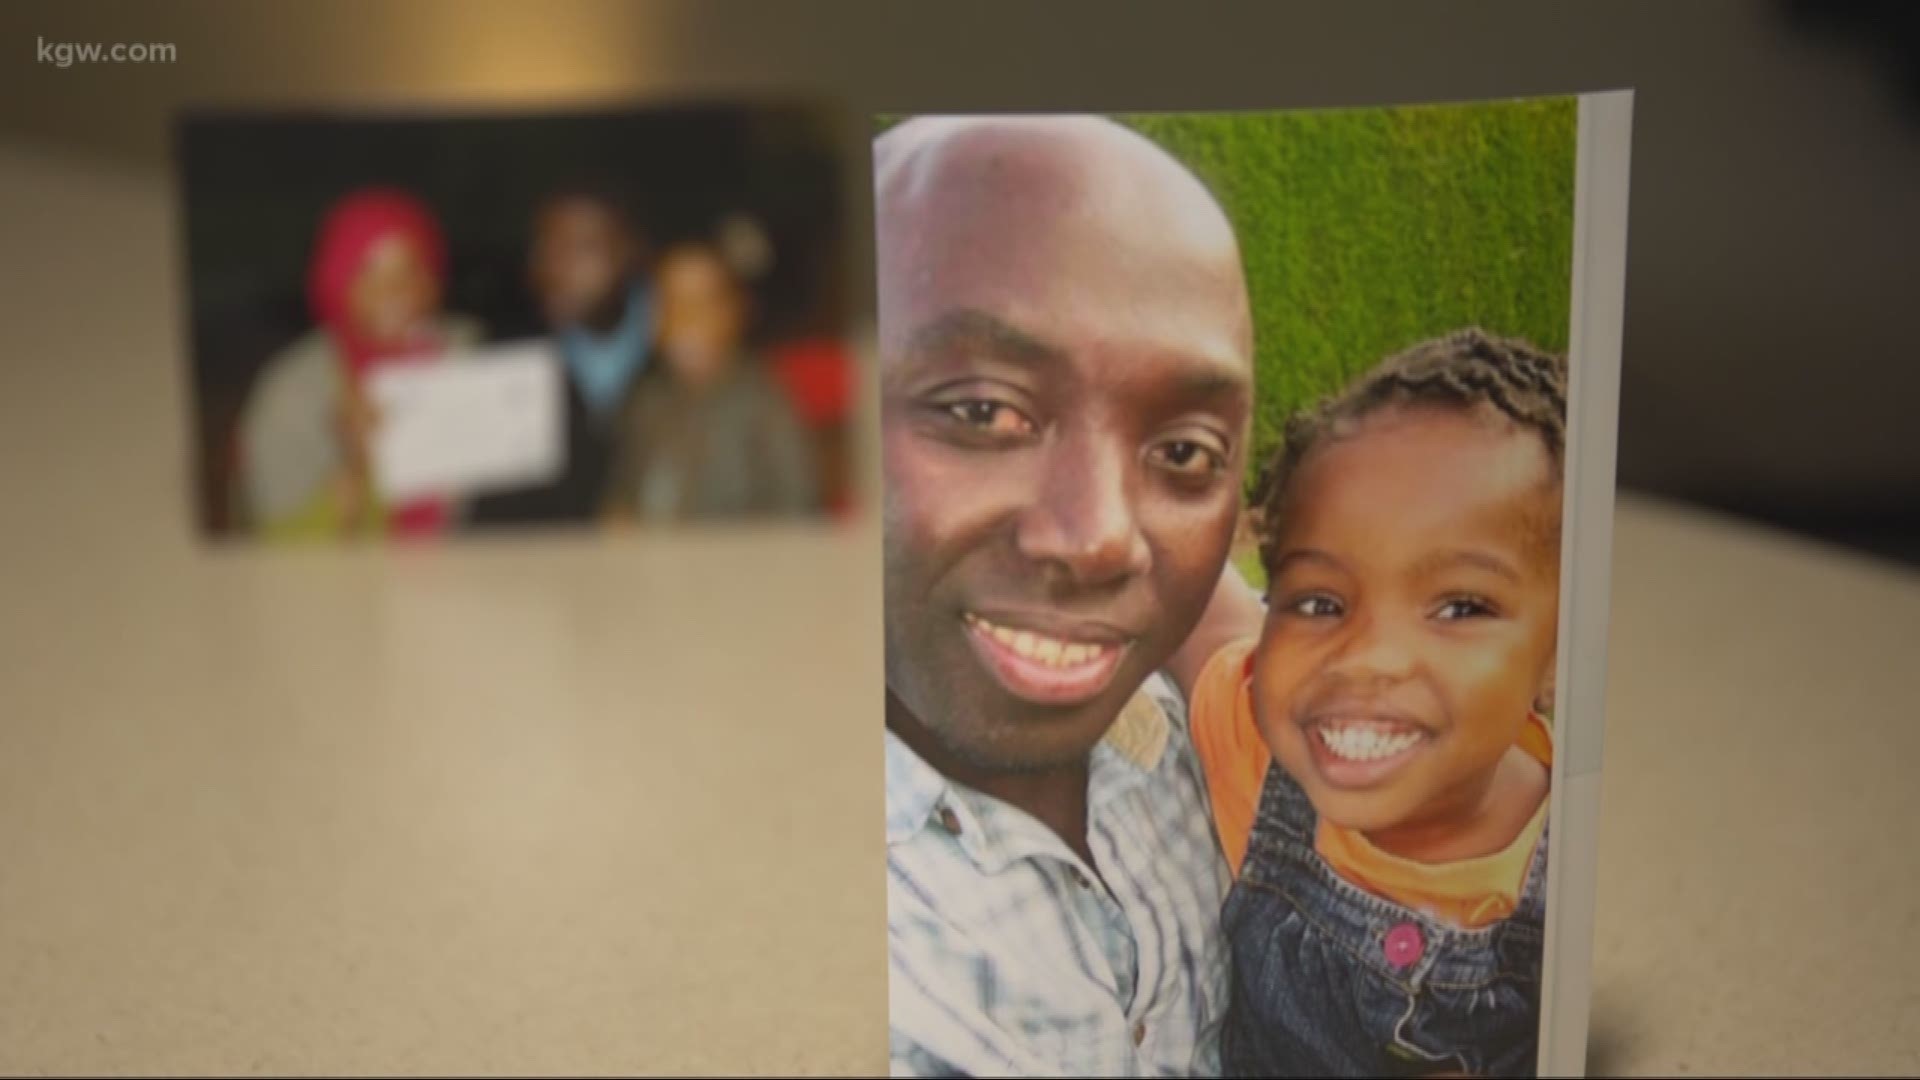 A Vancouver husband and father was picked up by ICE and deported with no warning back to The Gambia.